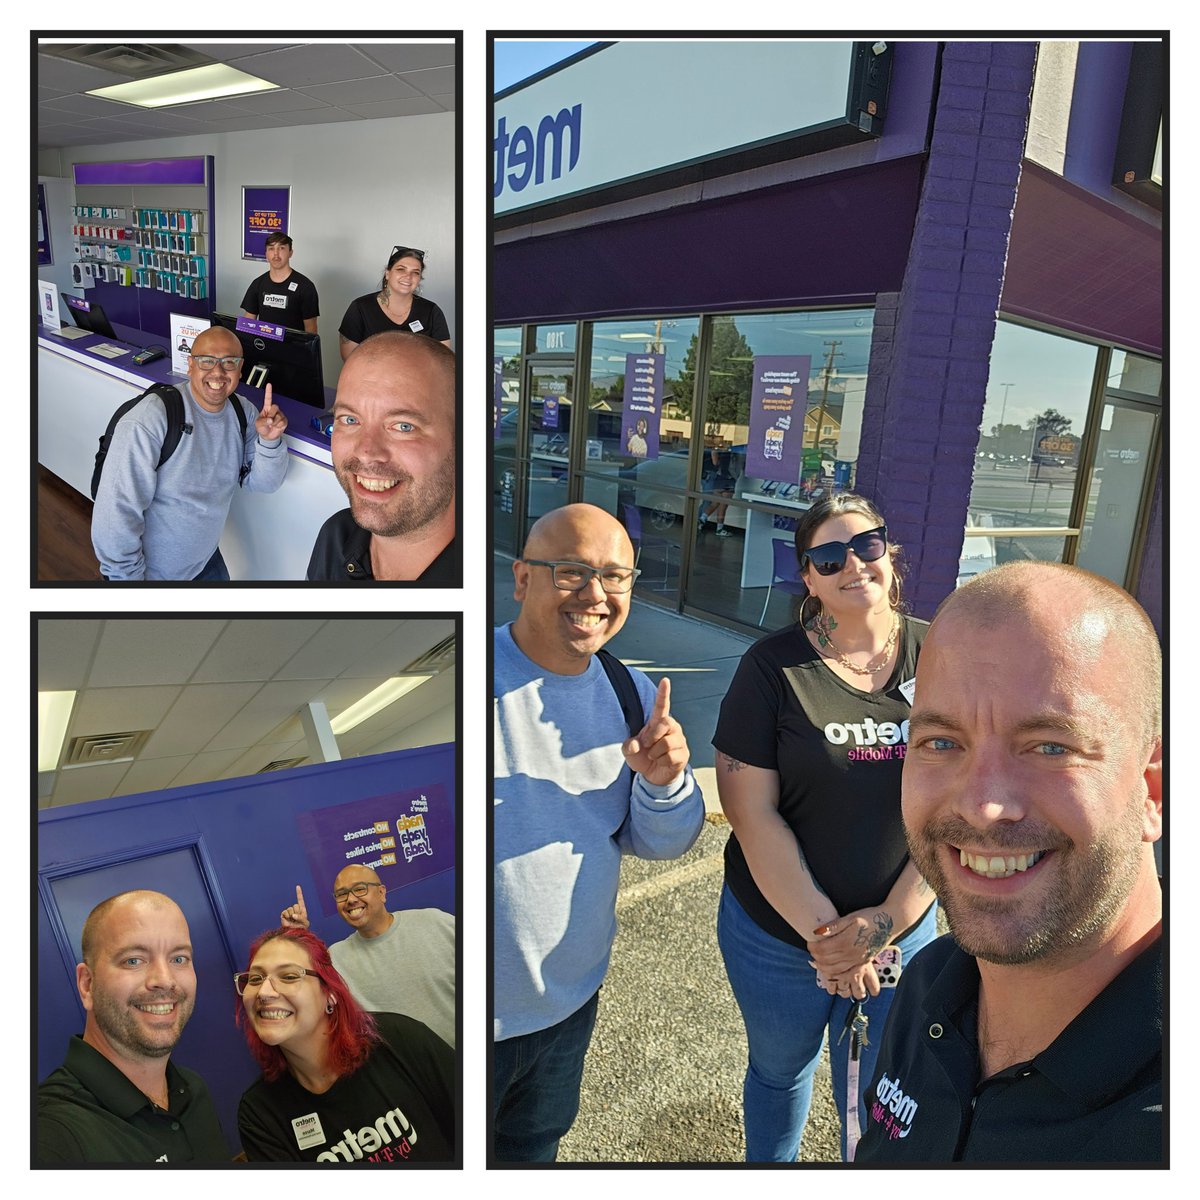 Exceptional store visits in Boise, Idaho alongside Charles from Assurant. The dedication to service and detail was unparalleled! #BoiseStrong #TeamAssurant